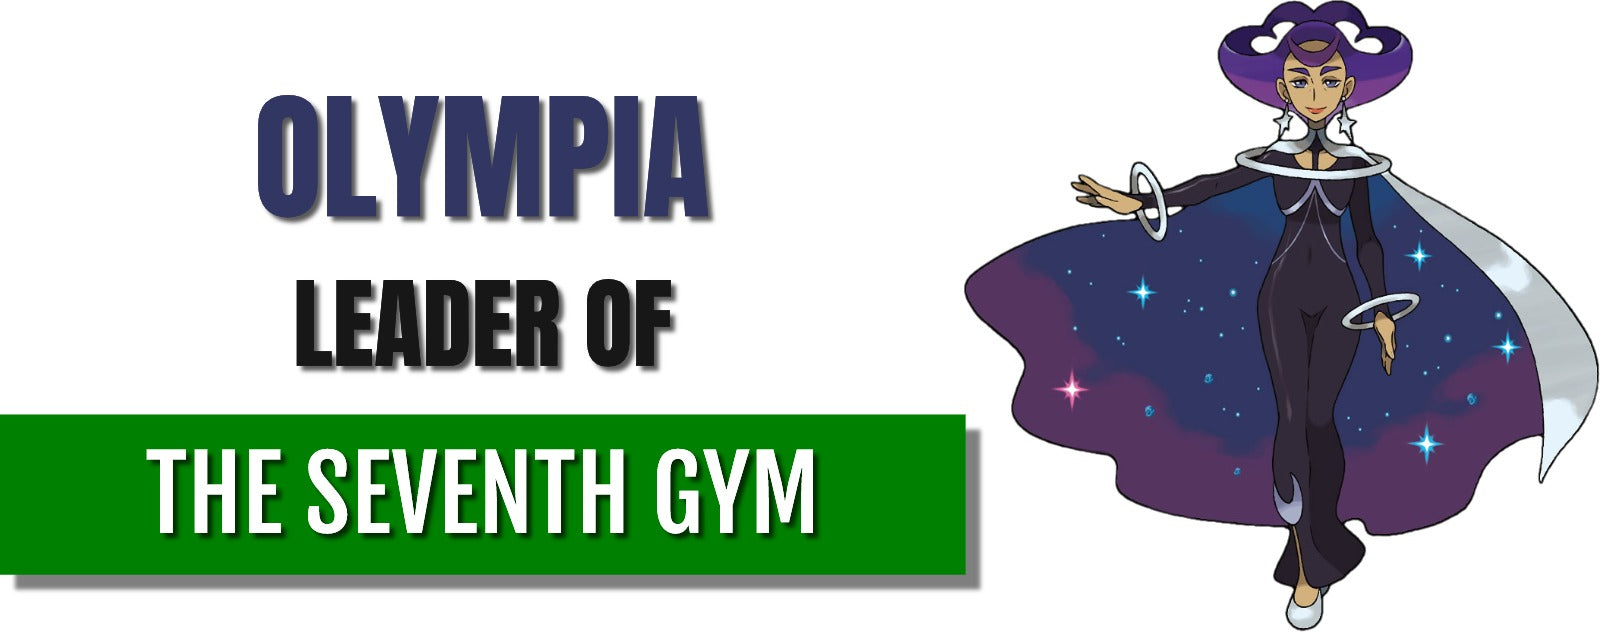 Olympa leader of the seventh gym